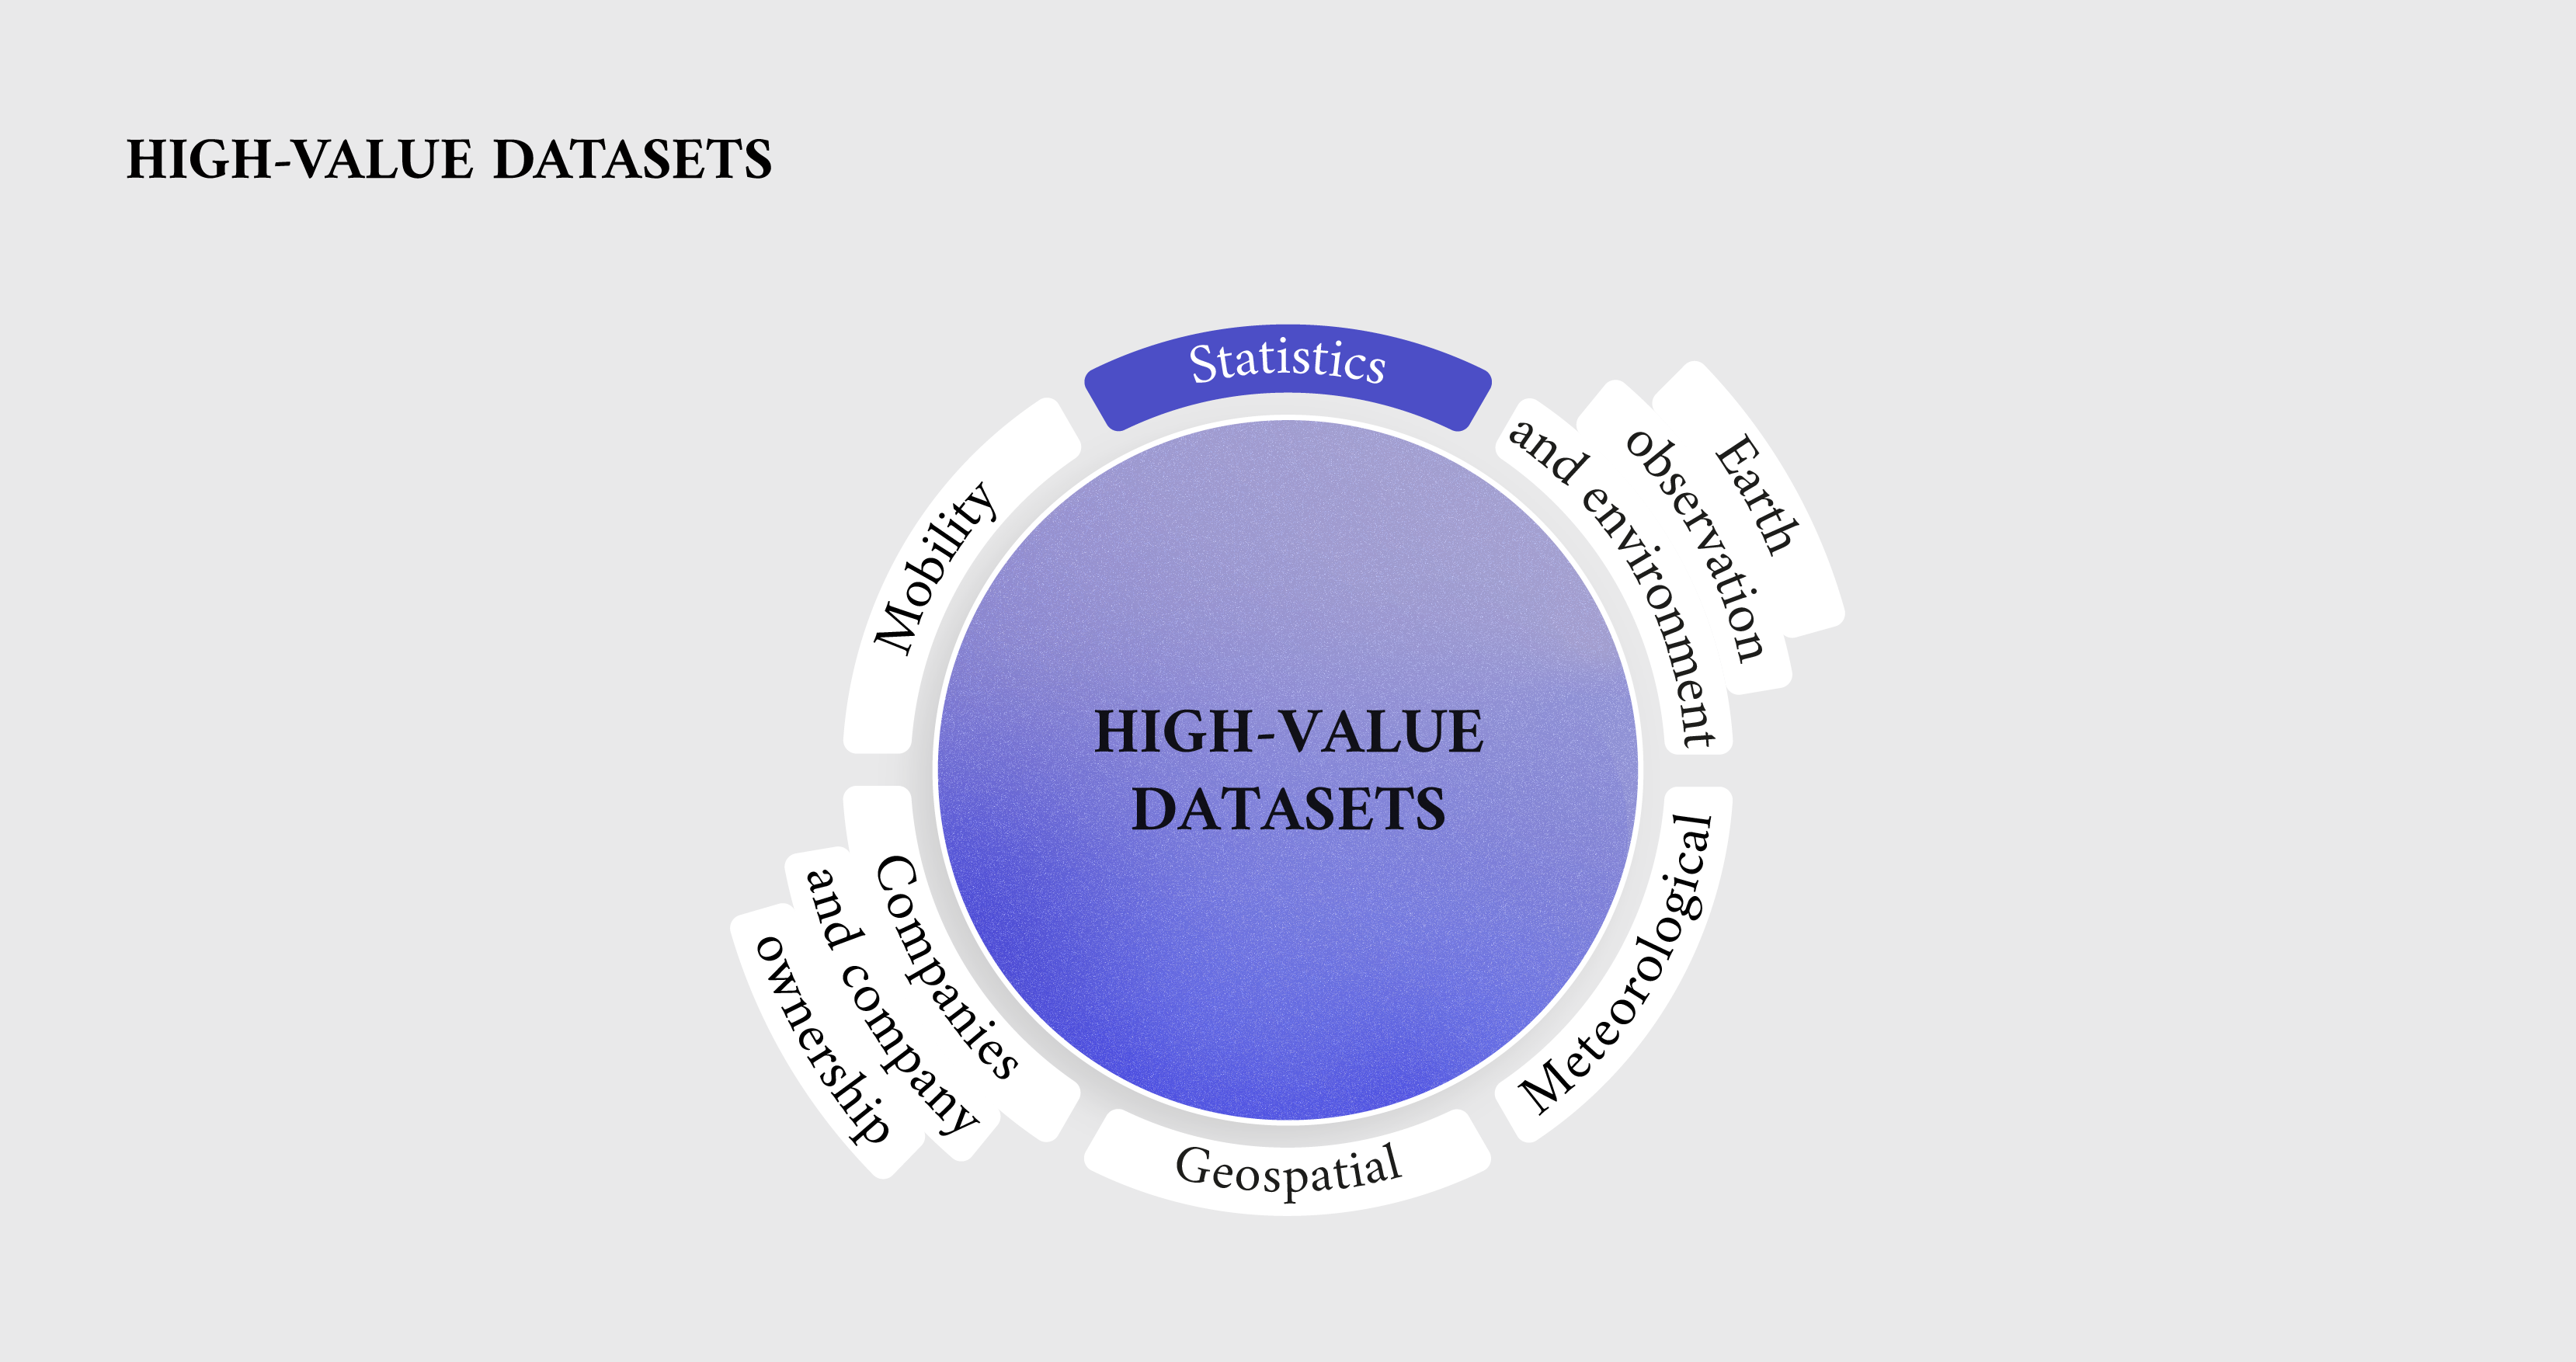 Overview of high-value datasets